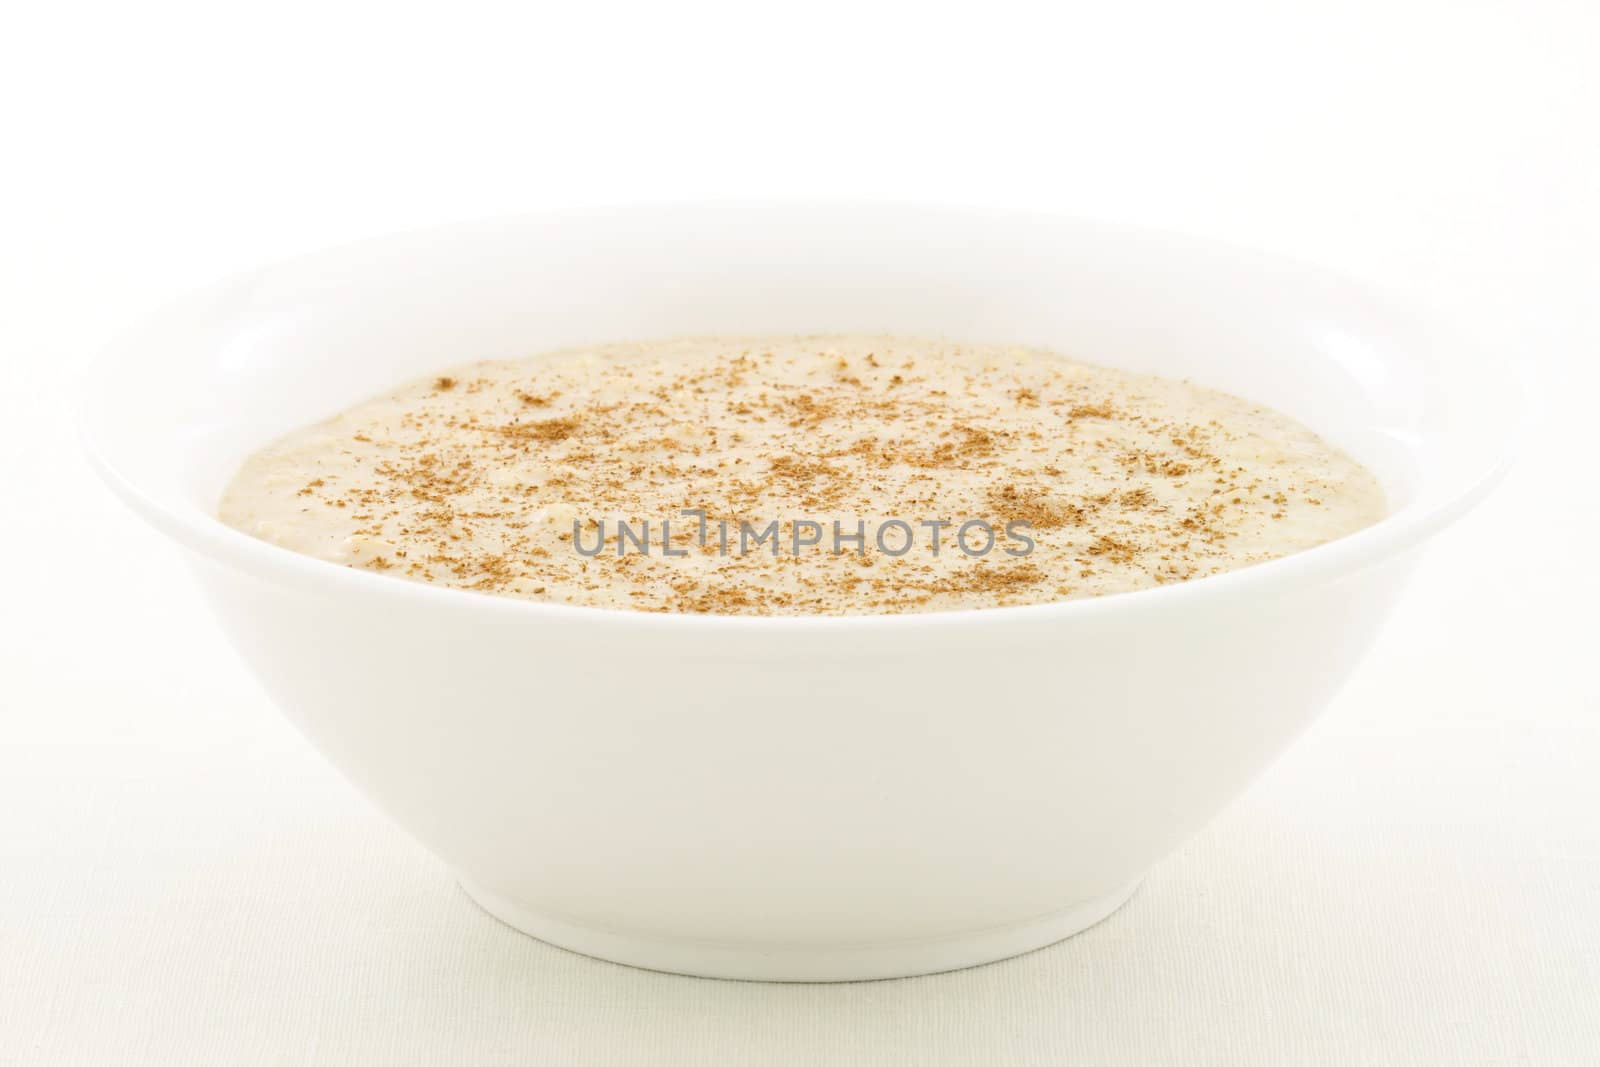 delicious and nutritious bowl of oatmeal, the perfect healthy way to start your day.